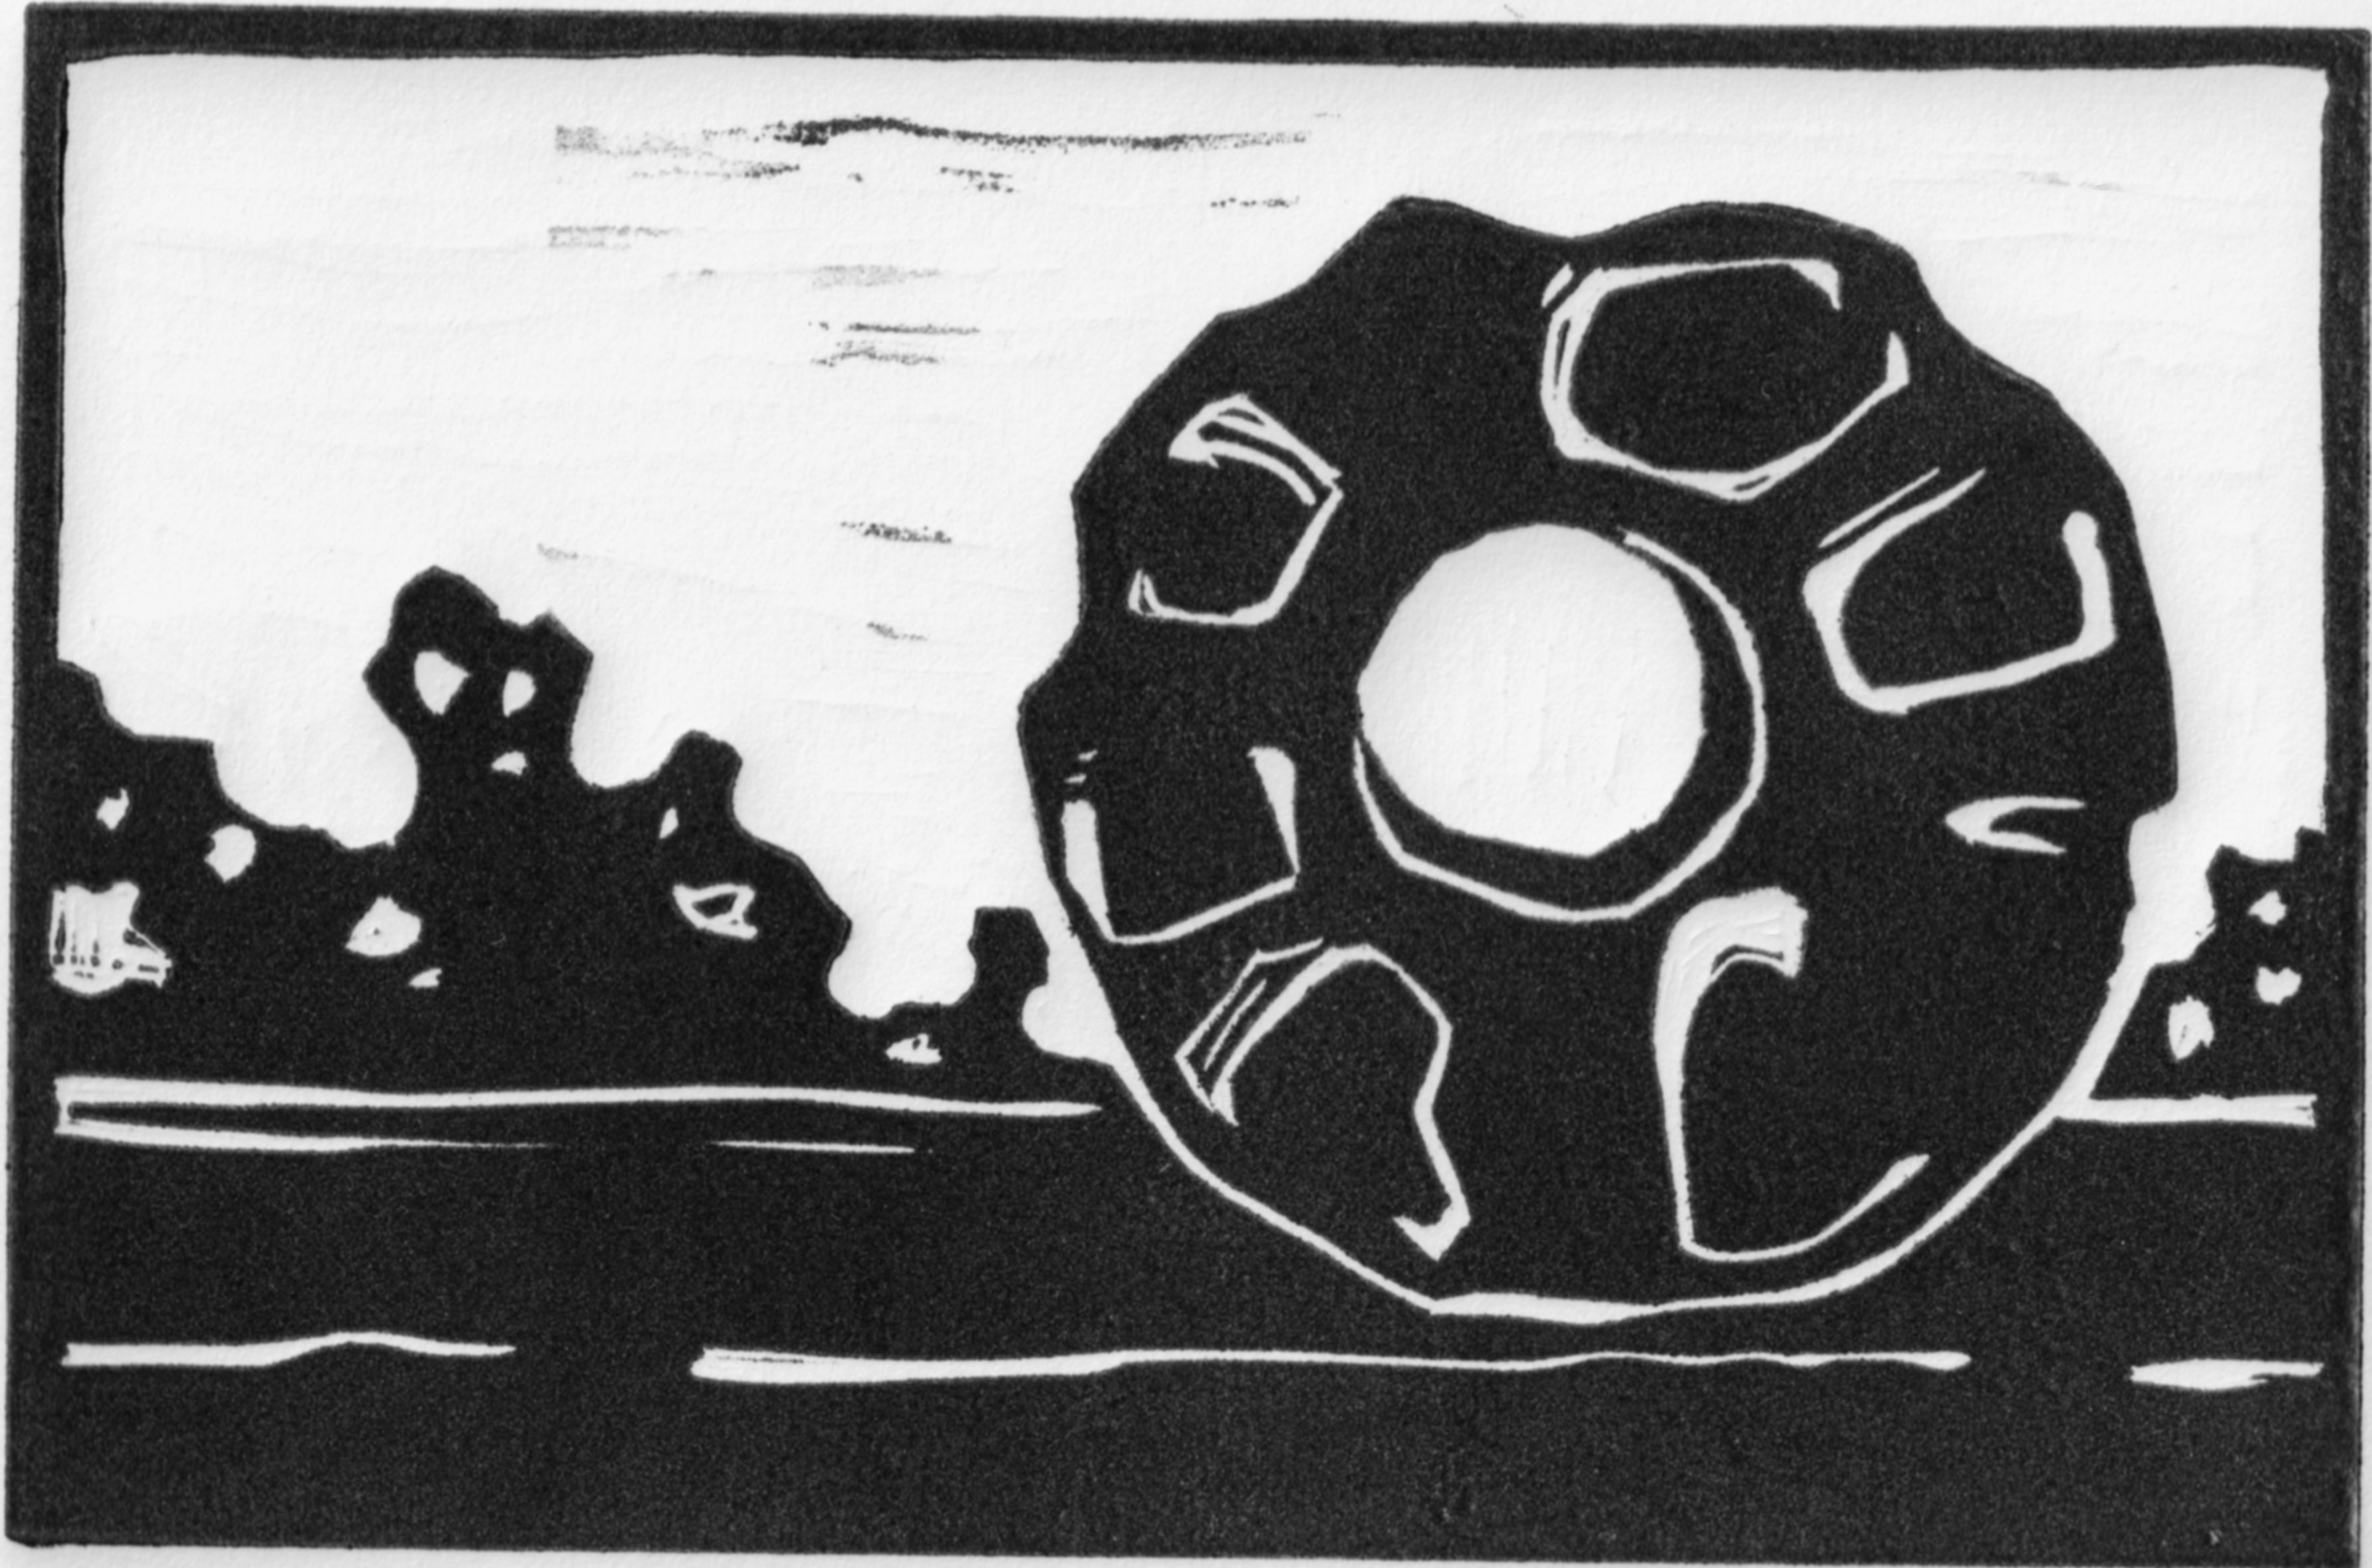 Black and white linocut print depicting the sculpture titled Black Sun by artist Isamo Noguchi located in Seattle